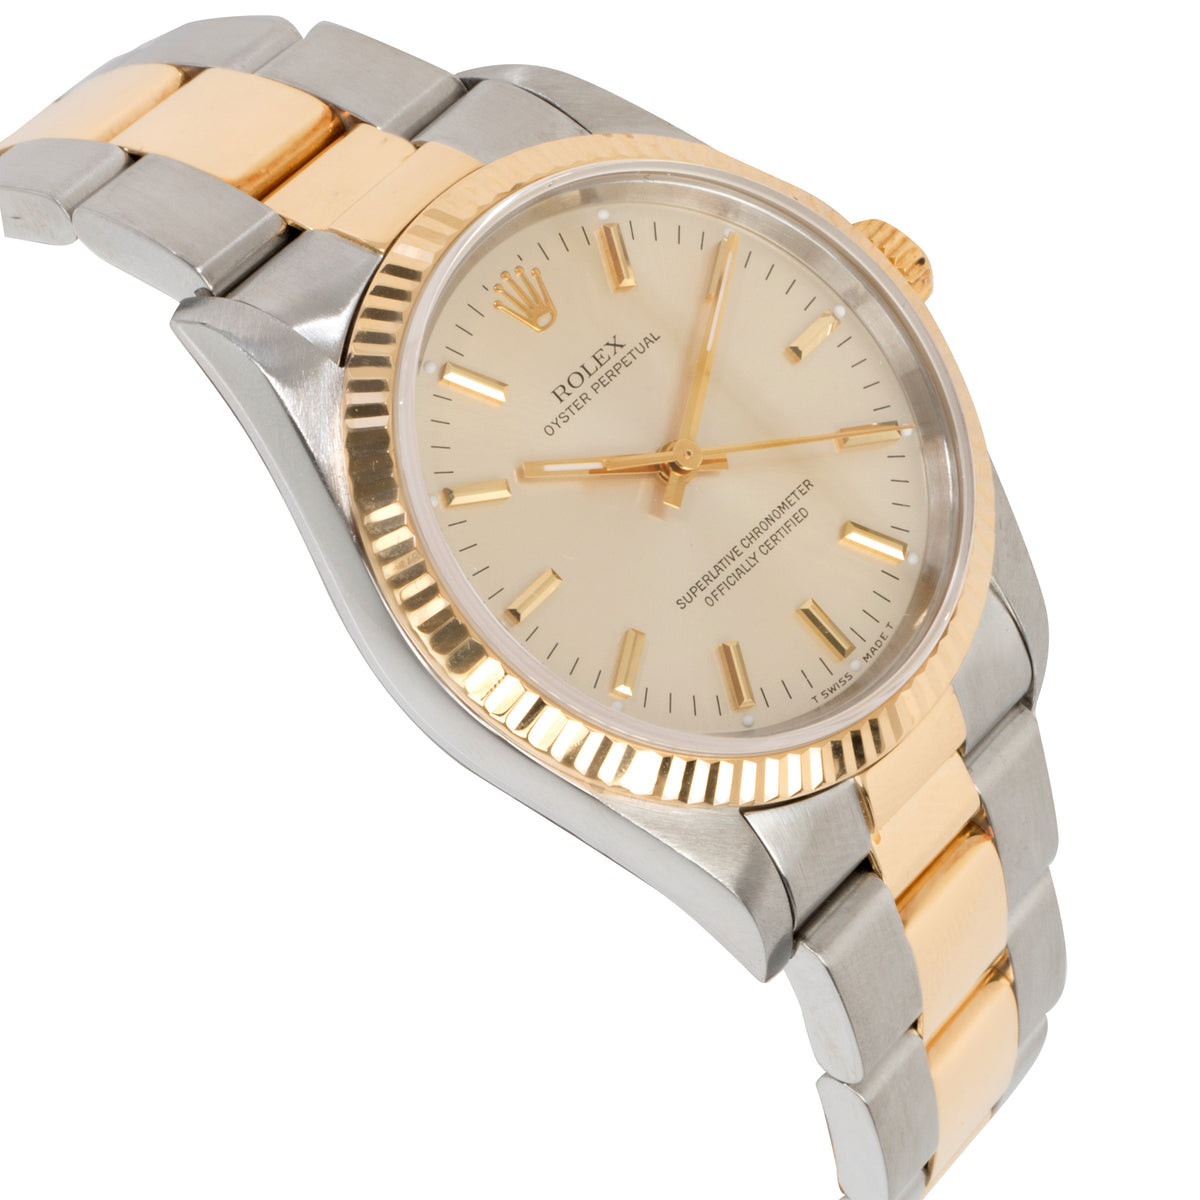 Rolex Oyster Perpetual 14233 Men's Watch in 18kt Stainless Steel/Yellow Gold